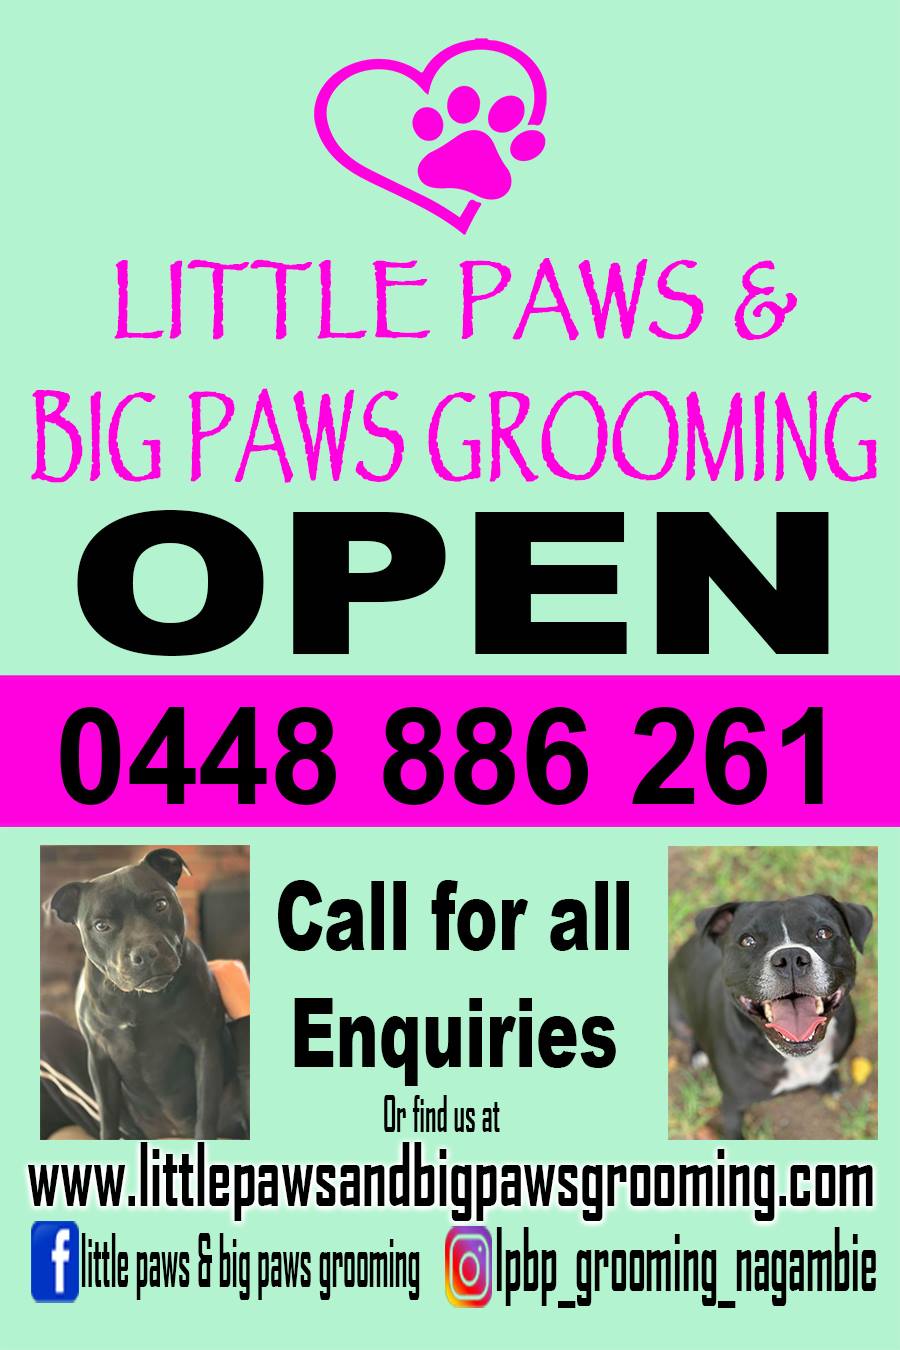 Little Paws & Big Paws Grooming Nagambie |  | 213 High St, Nagambie VIC 3608, Australia | 0448886261 OR +61 448 886 261